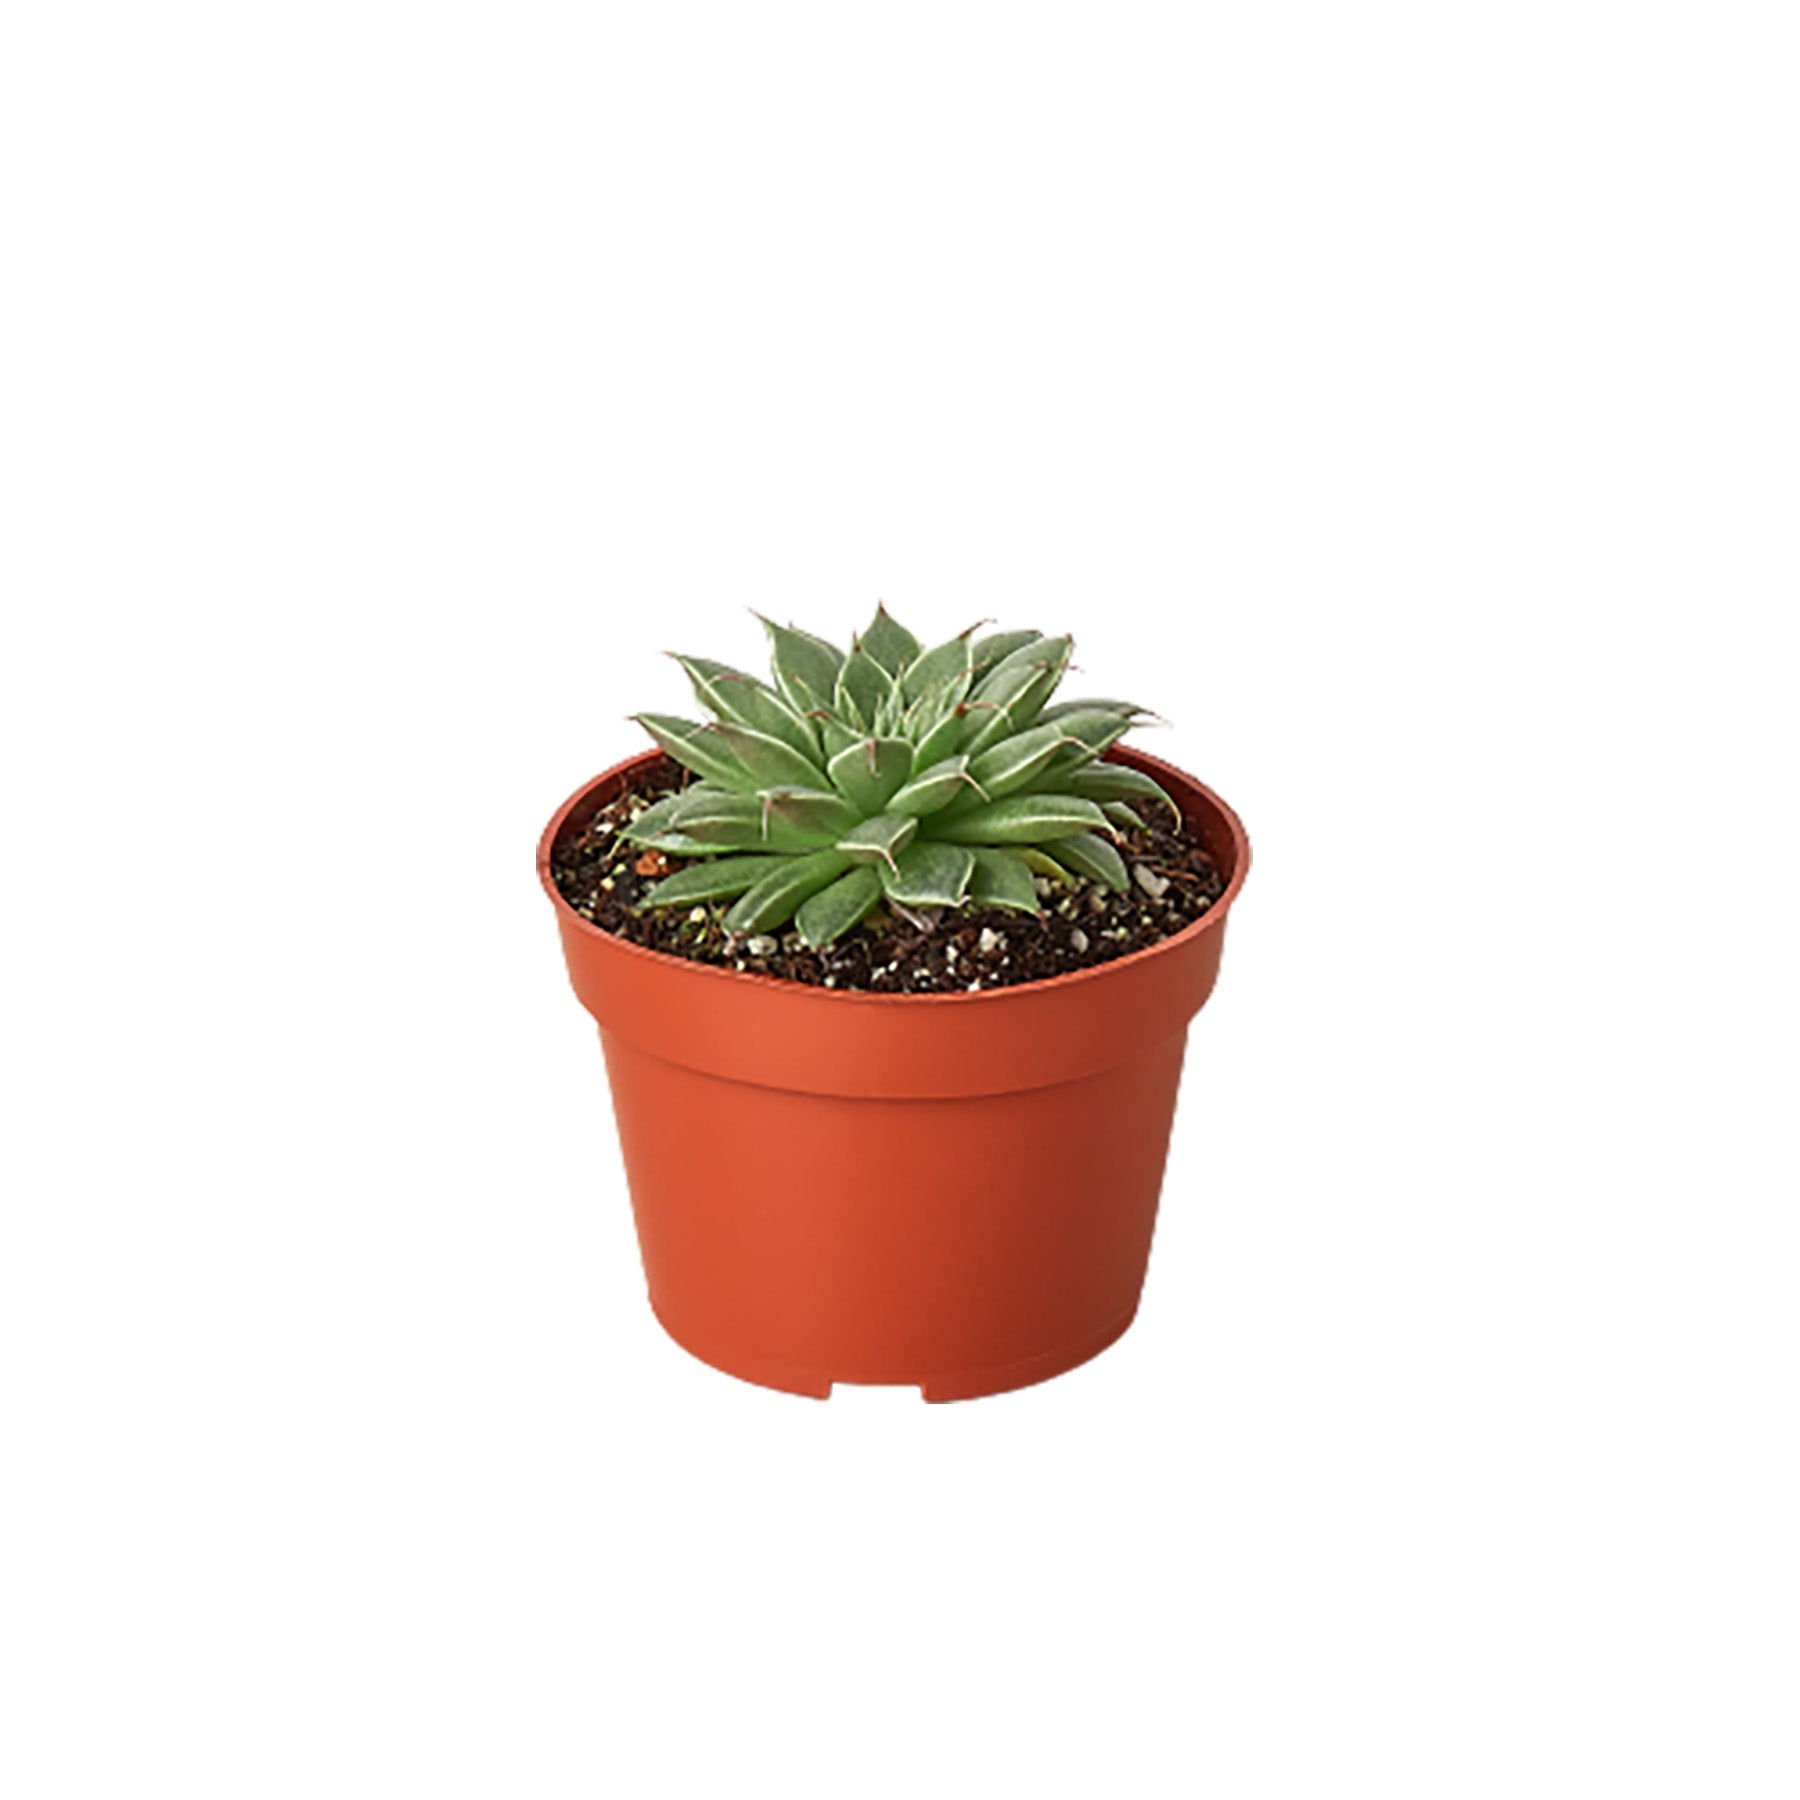 A small succulent plant in a pot on a white background, perfect for your garden or as an addition to your indoor plants collection.